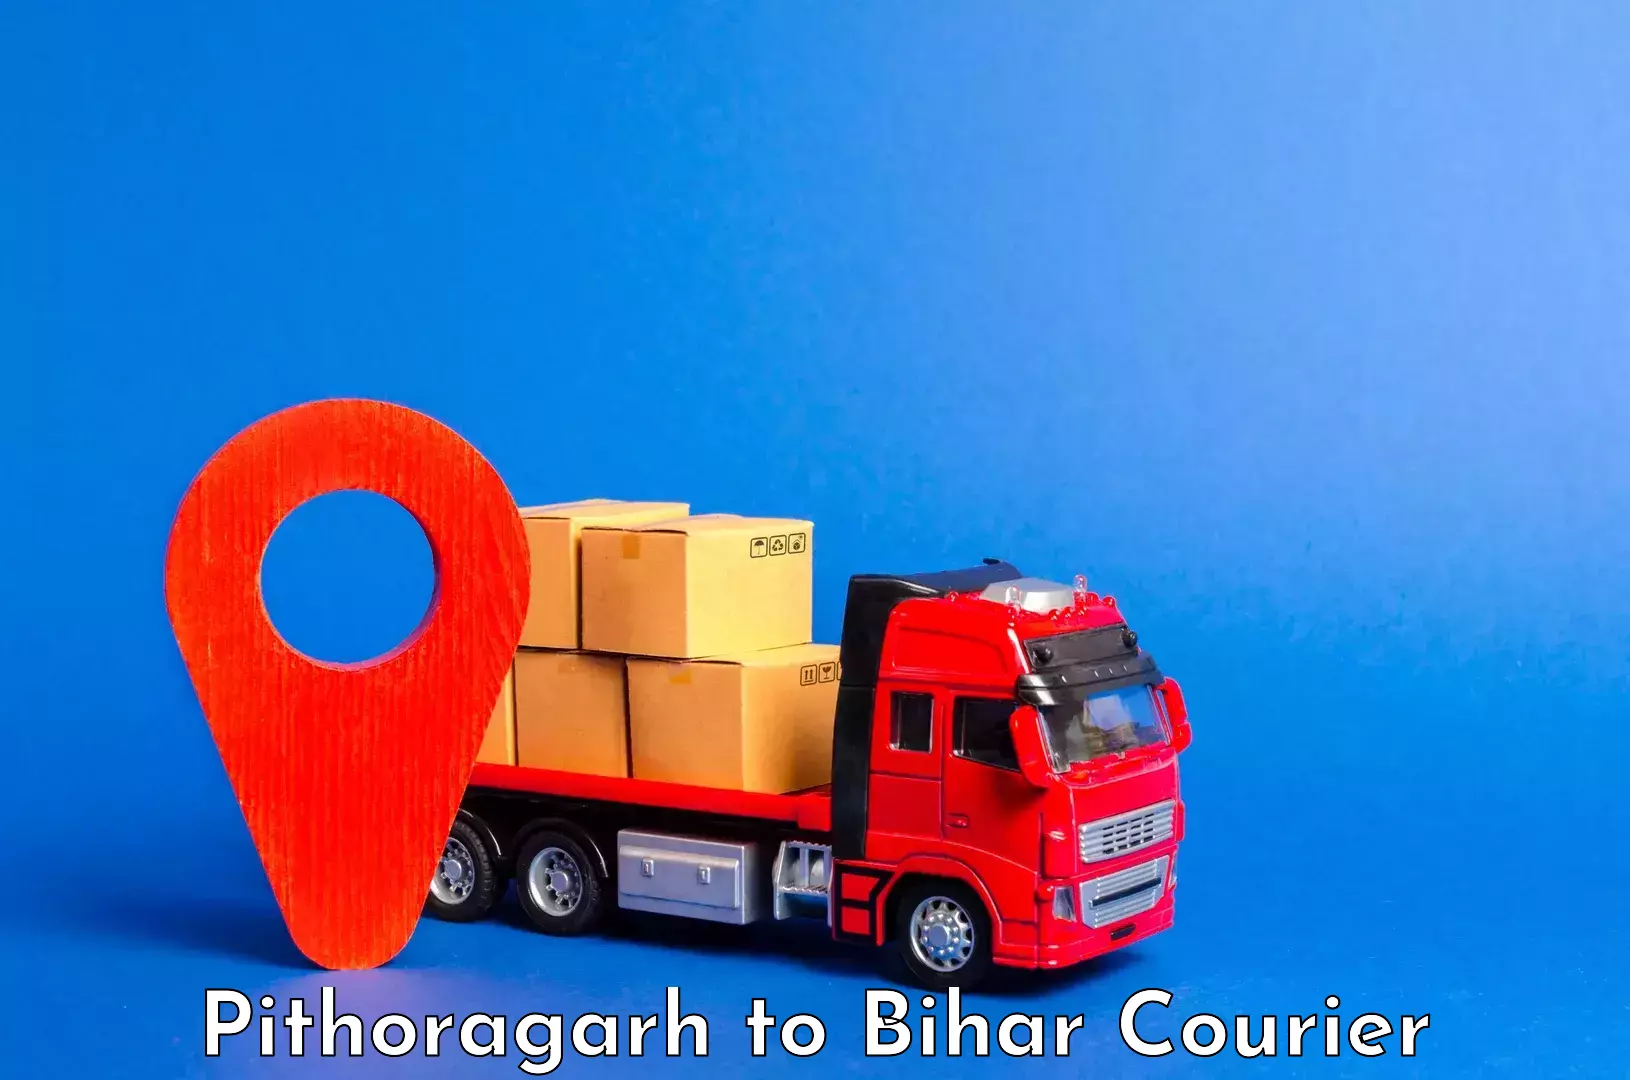 Luggage shipment specialists in Pithoragarh to Baisi